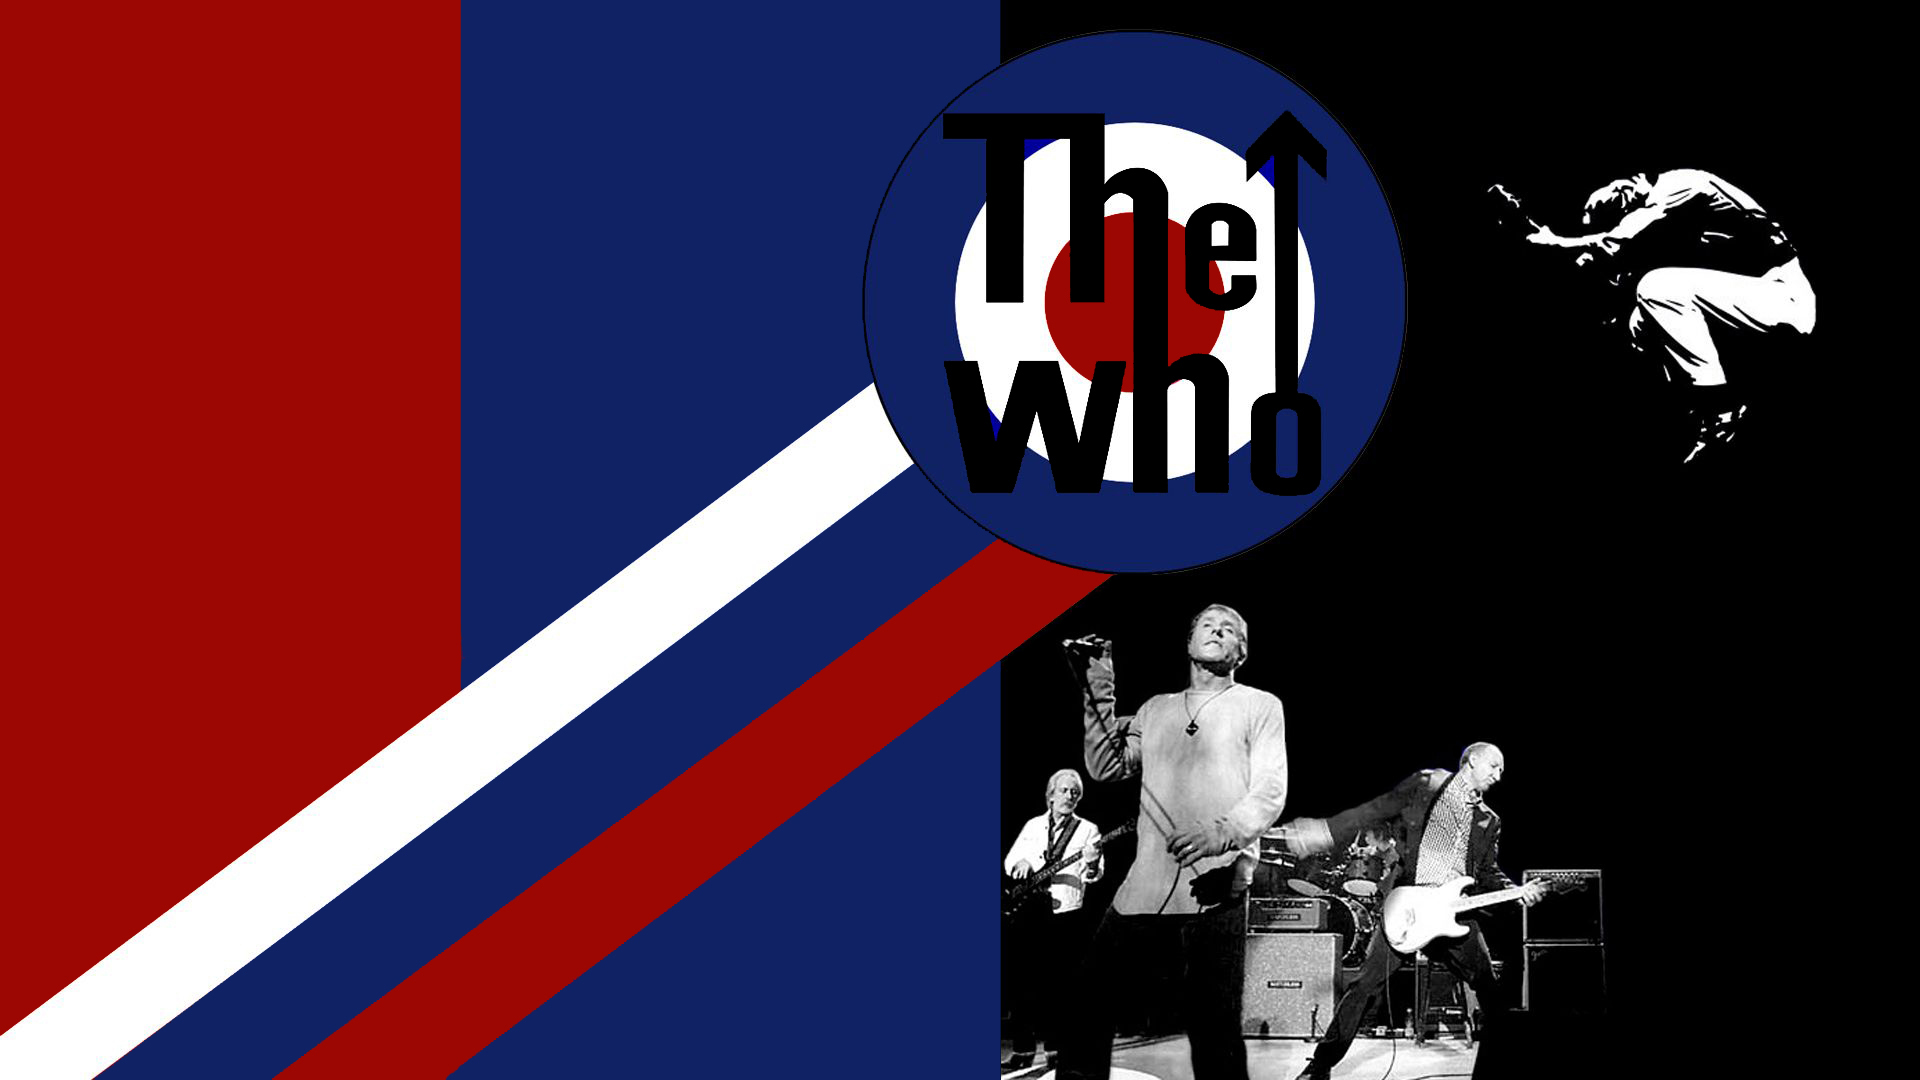 The Who HD Wallpaper For Desktop